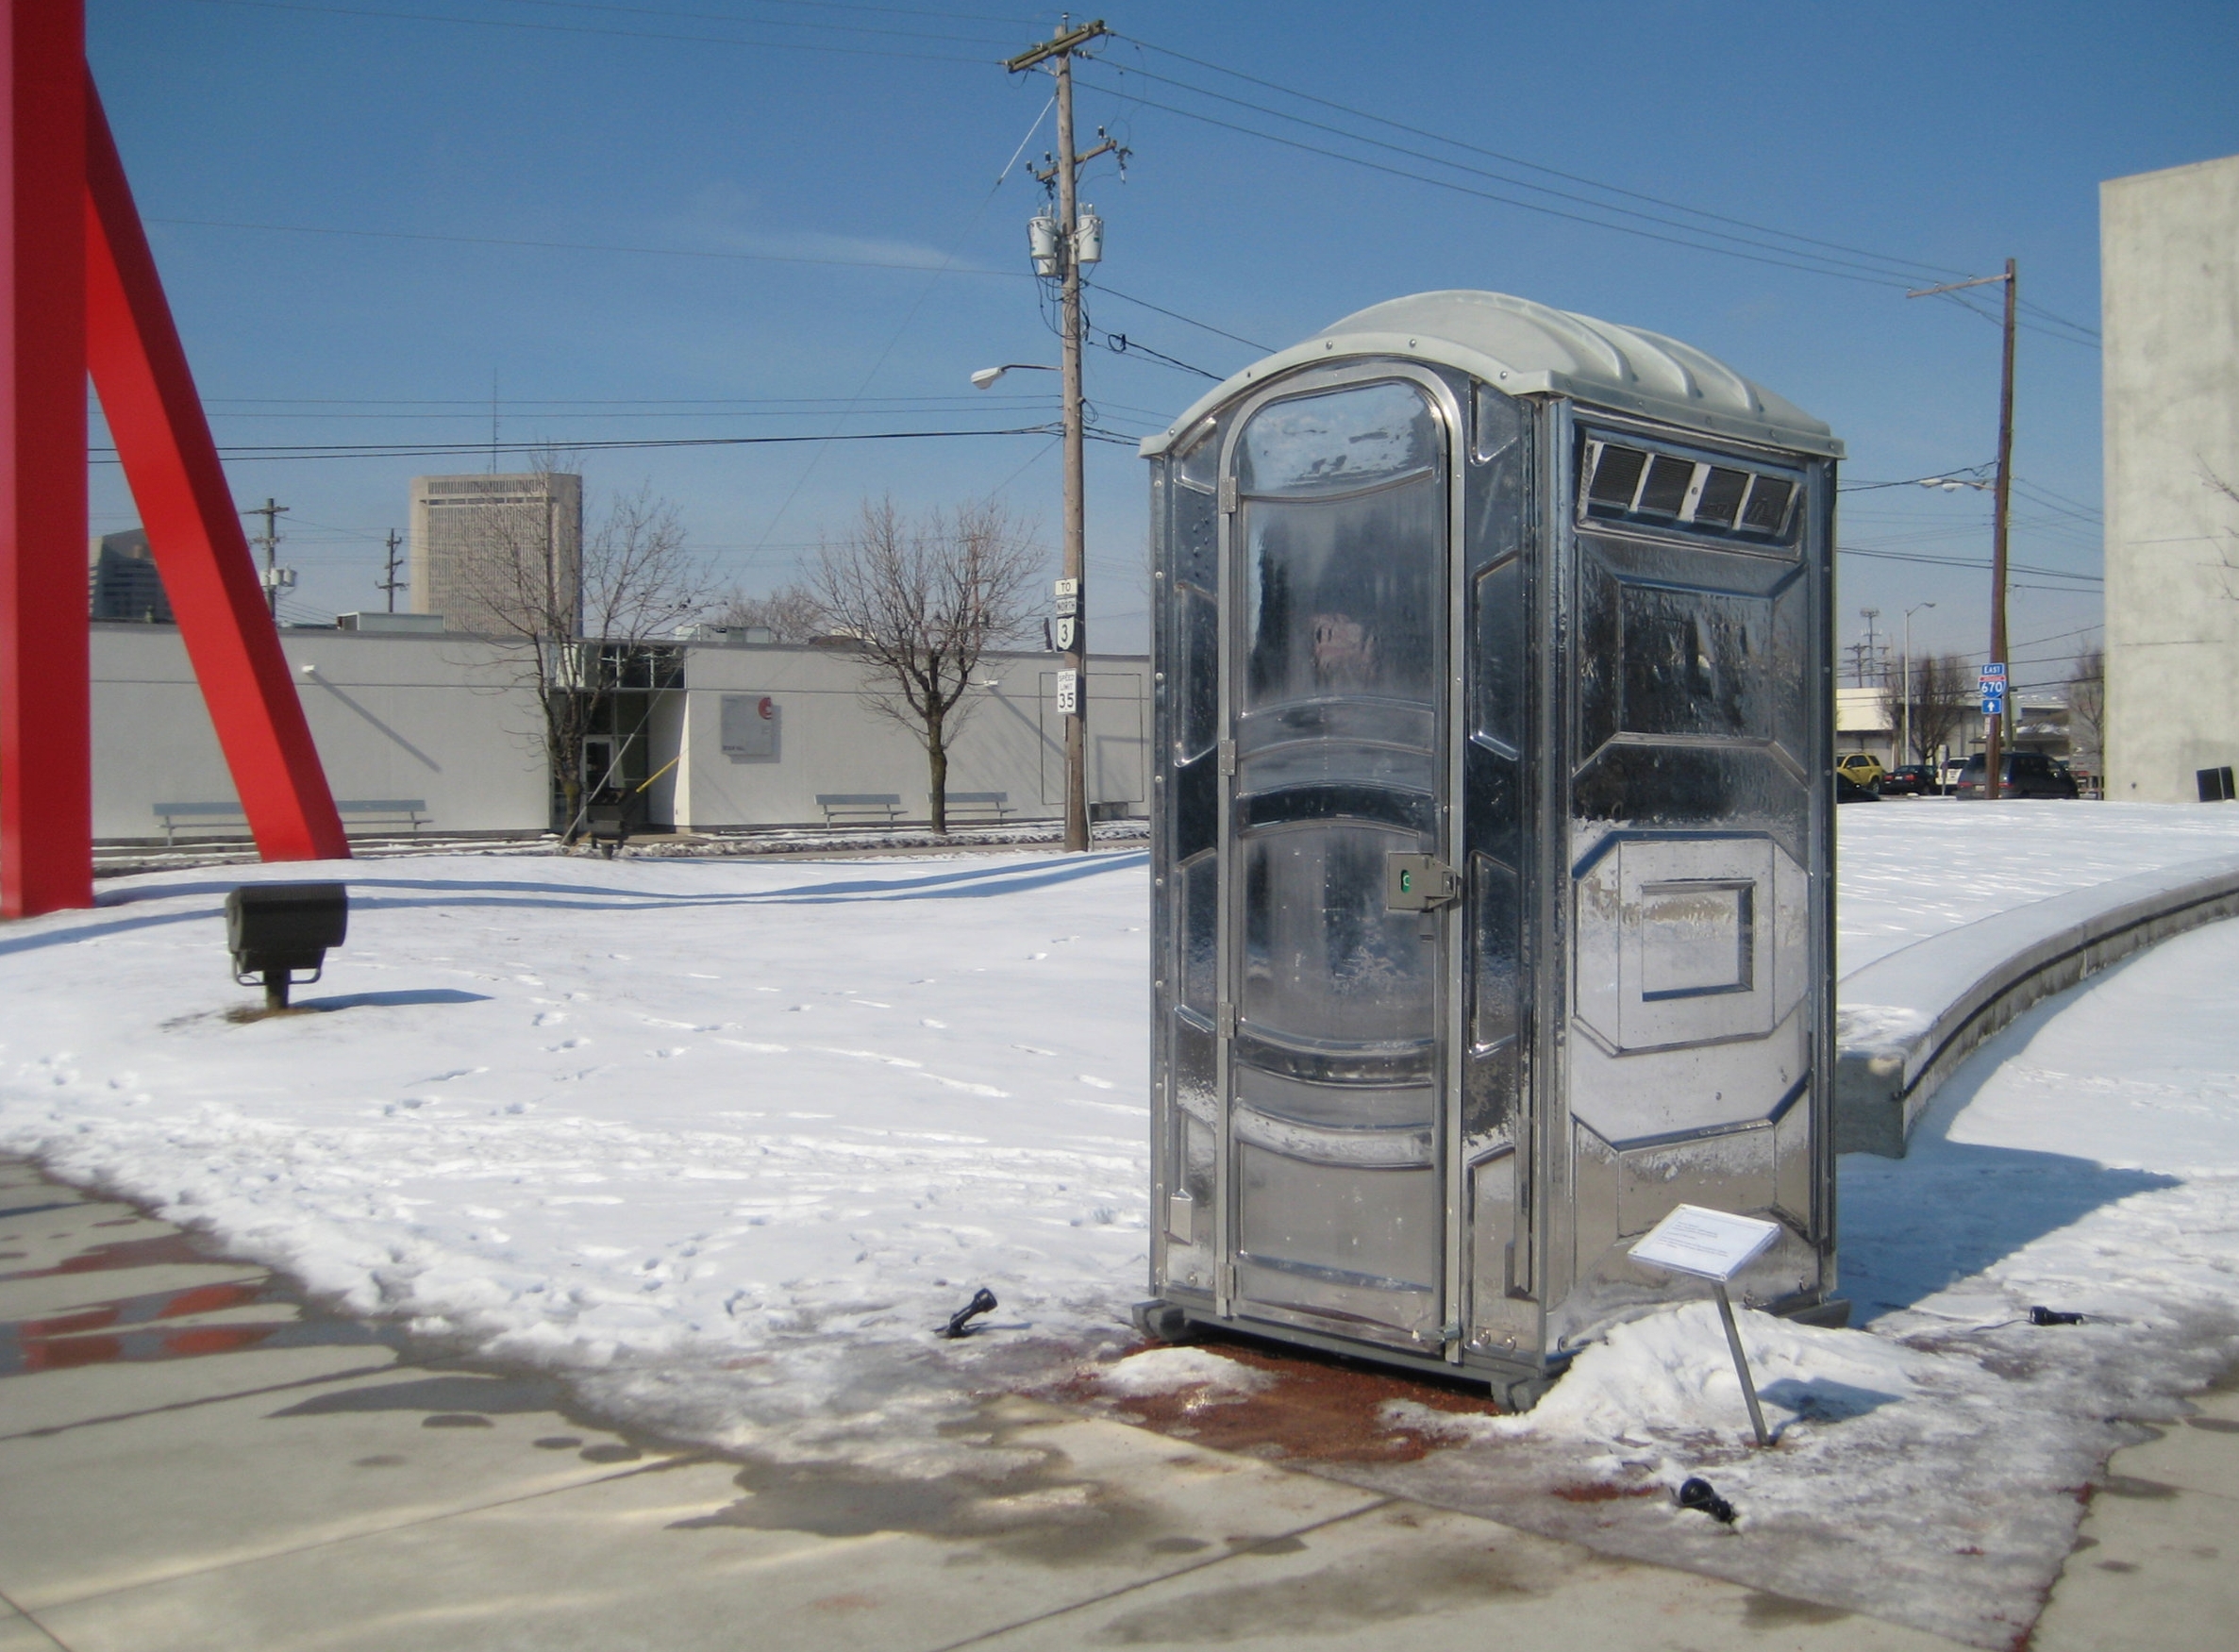  Patrick Killoran,  Glass Outhouse , 2002–ongoing, unlimited edition of port-a-potty, 91 x 43.5 x 47 inches. Courtesy of the artist. 